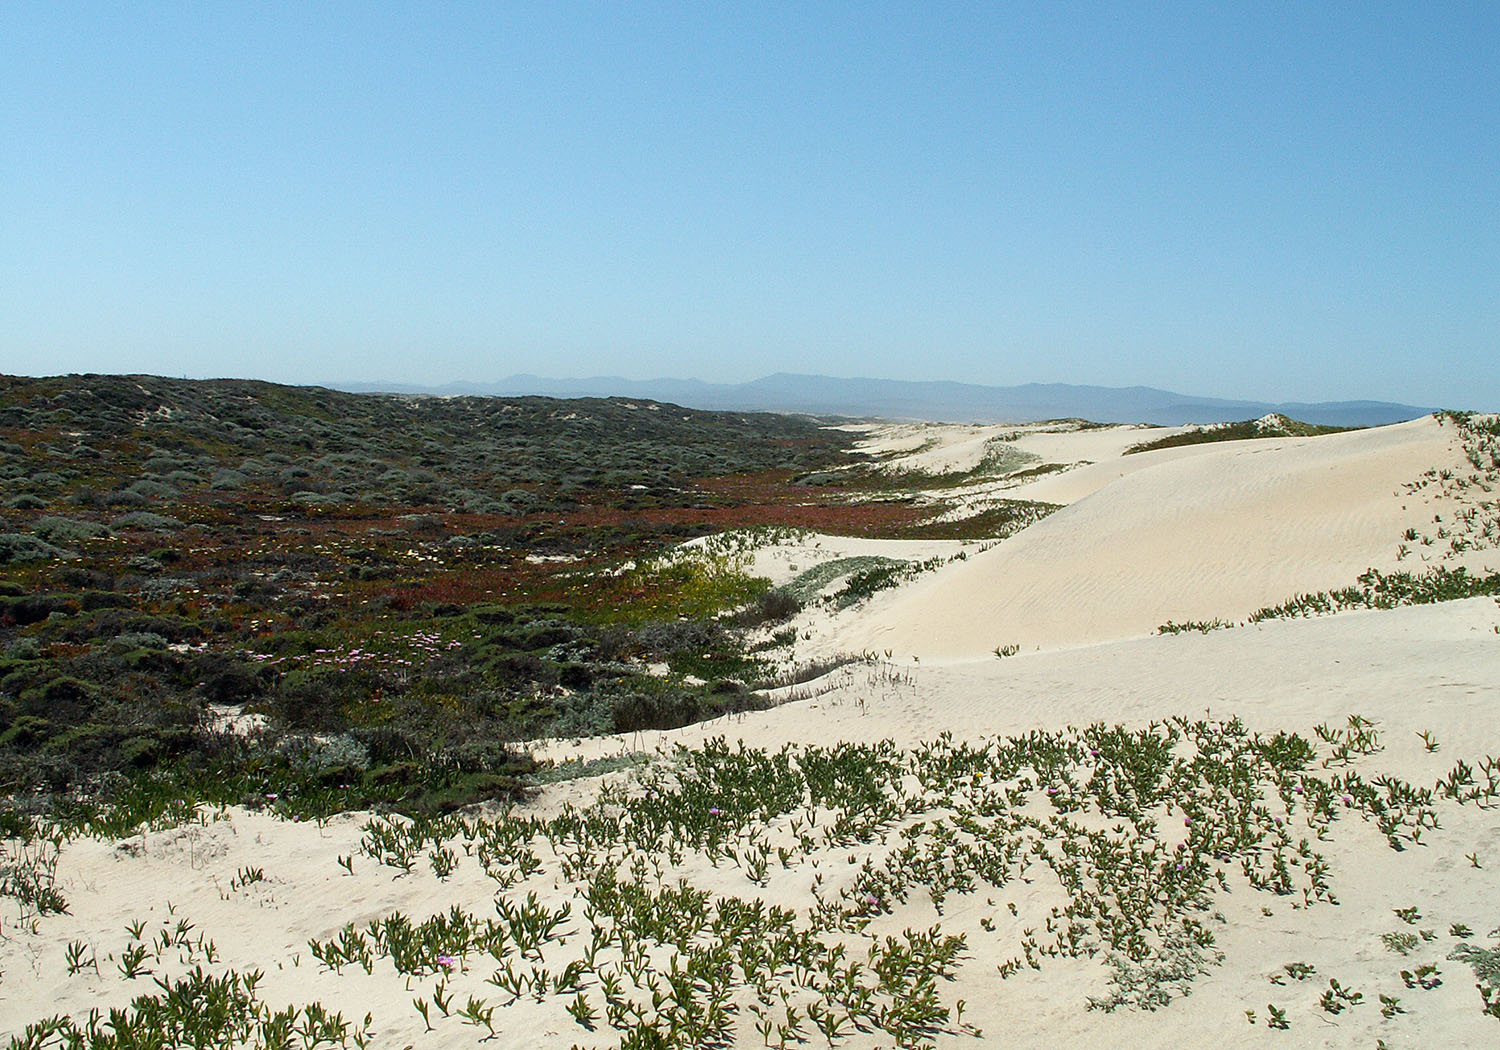 Sprawling vegetation and bare sand with low mountains in the background. 